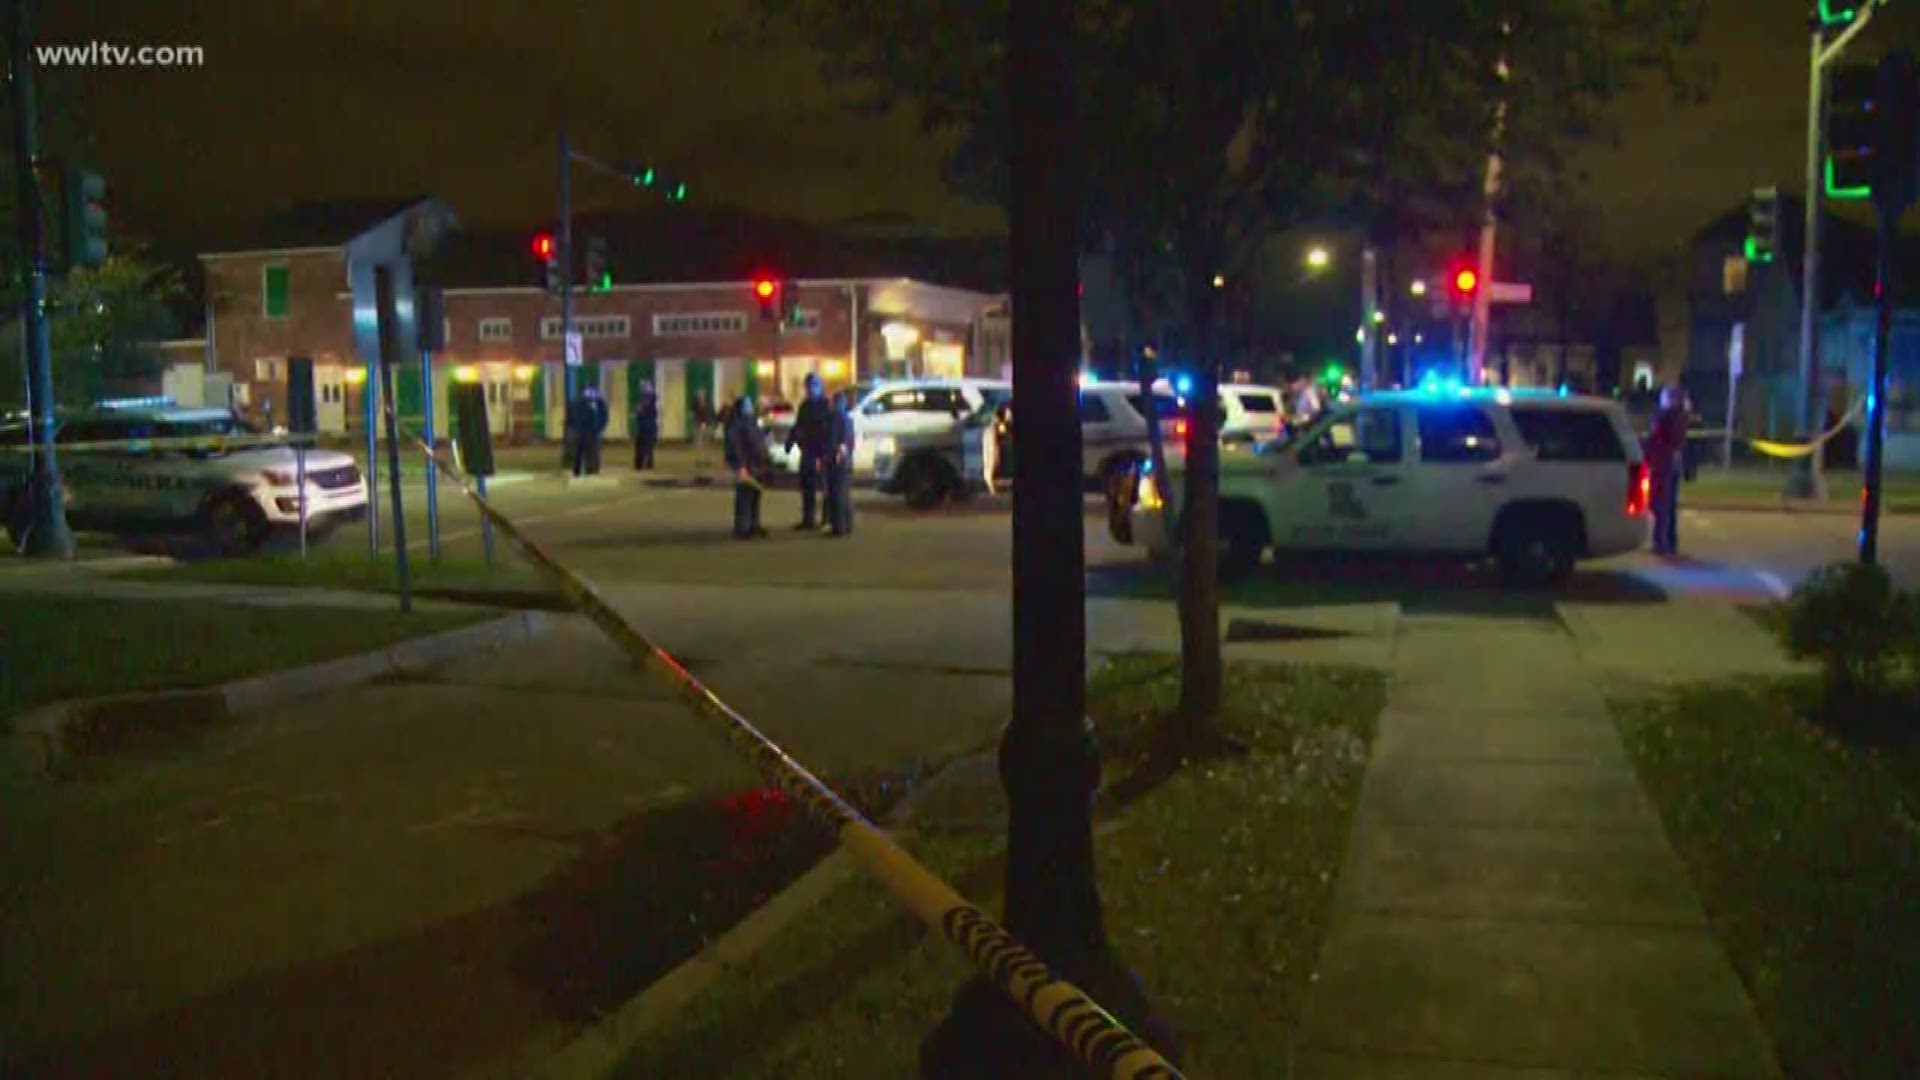 The officer was hit in his bulletproof vest on Friday night during a fatal shootout.